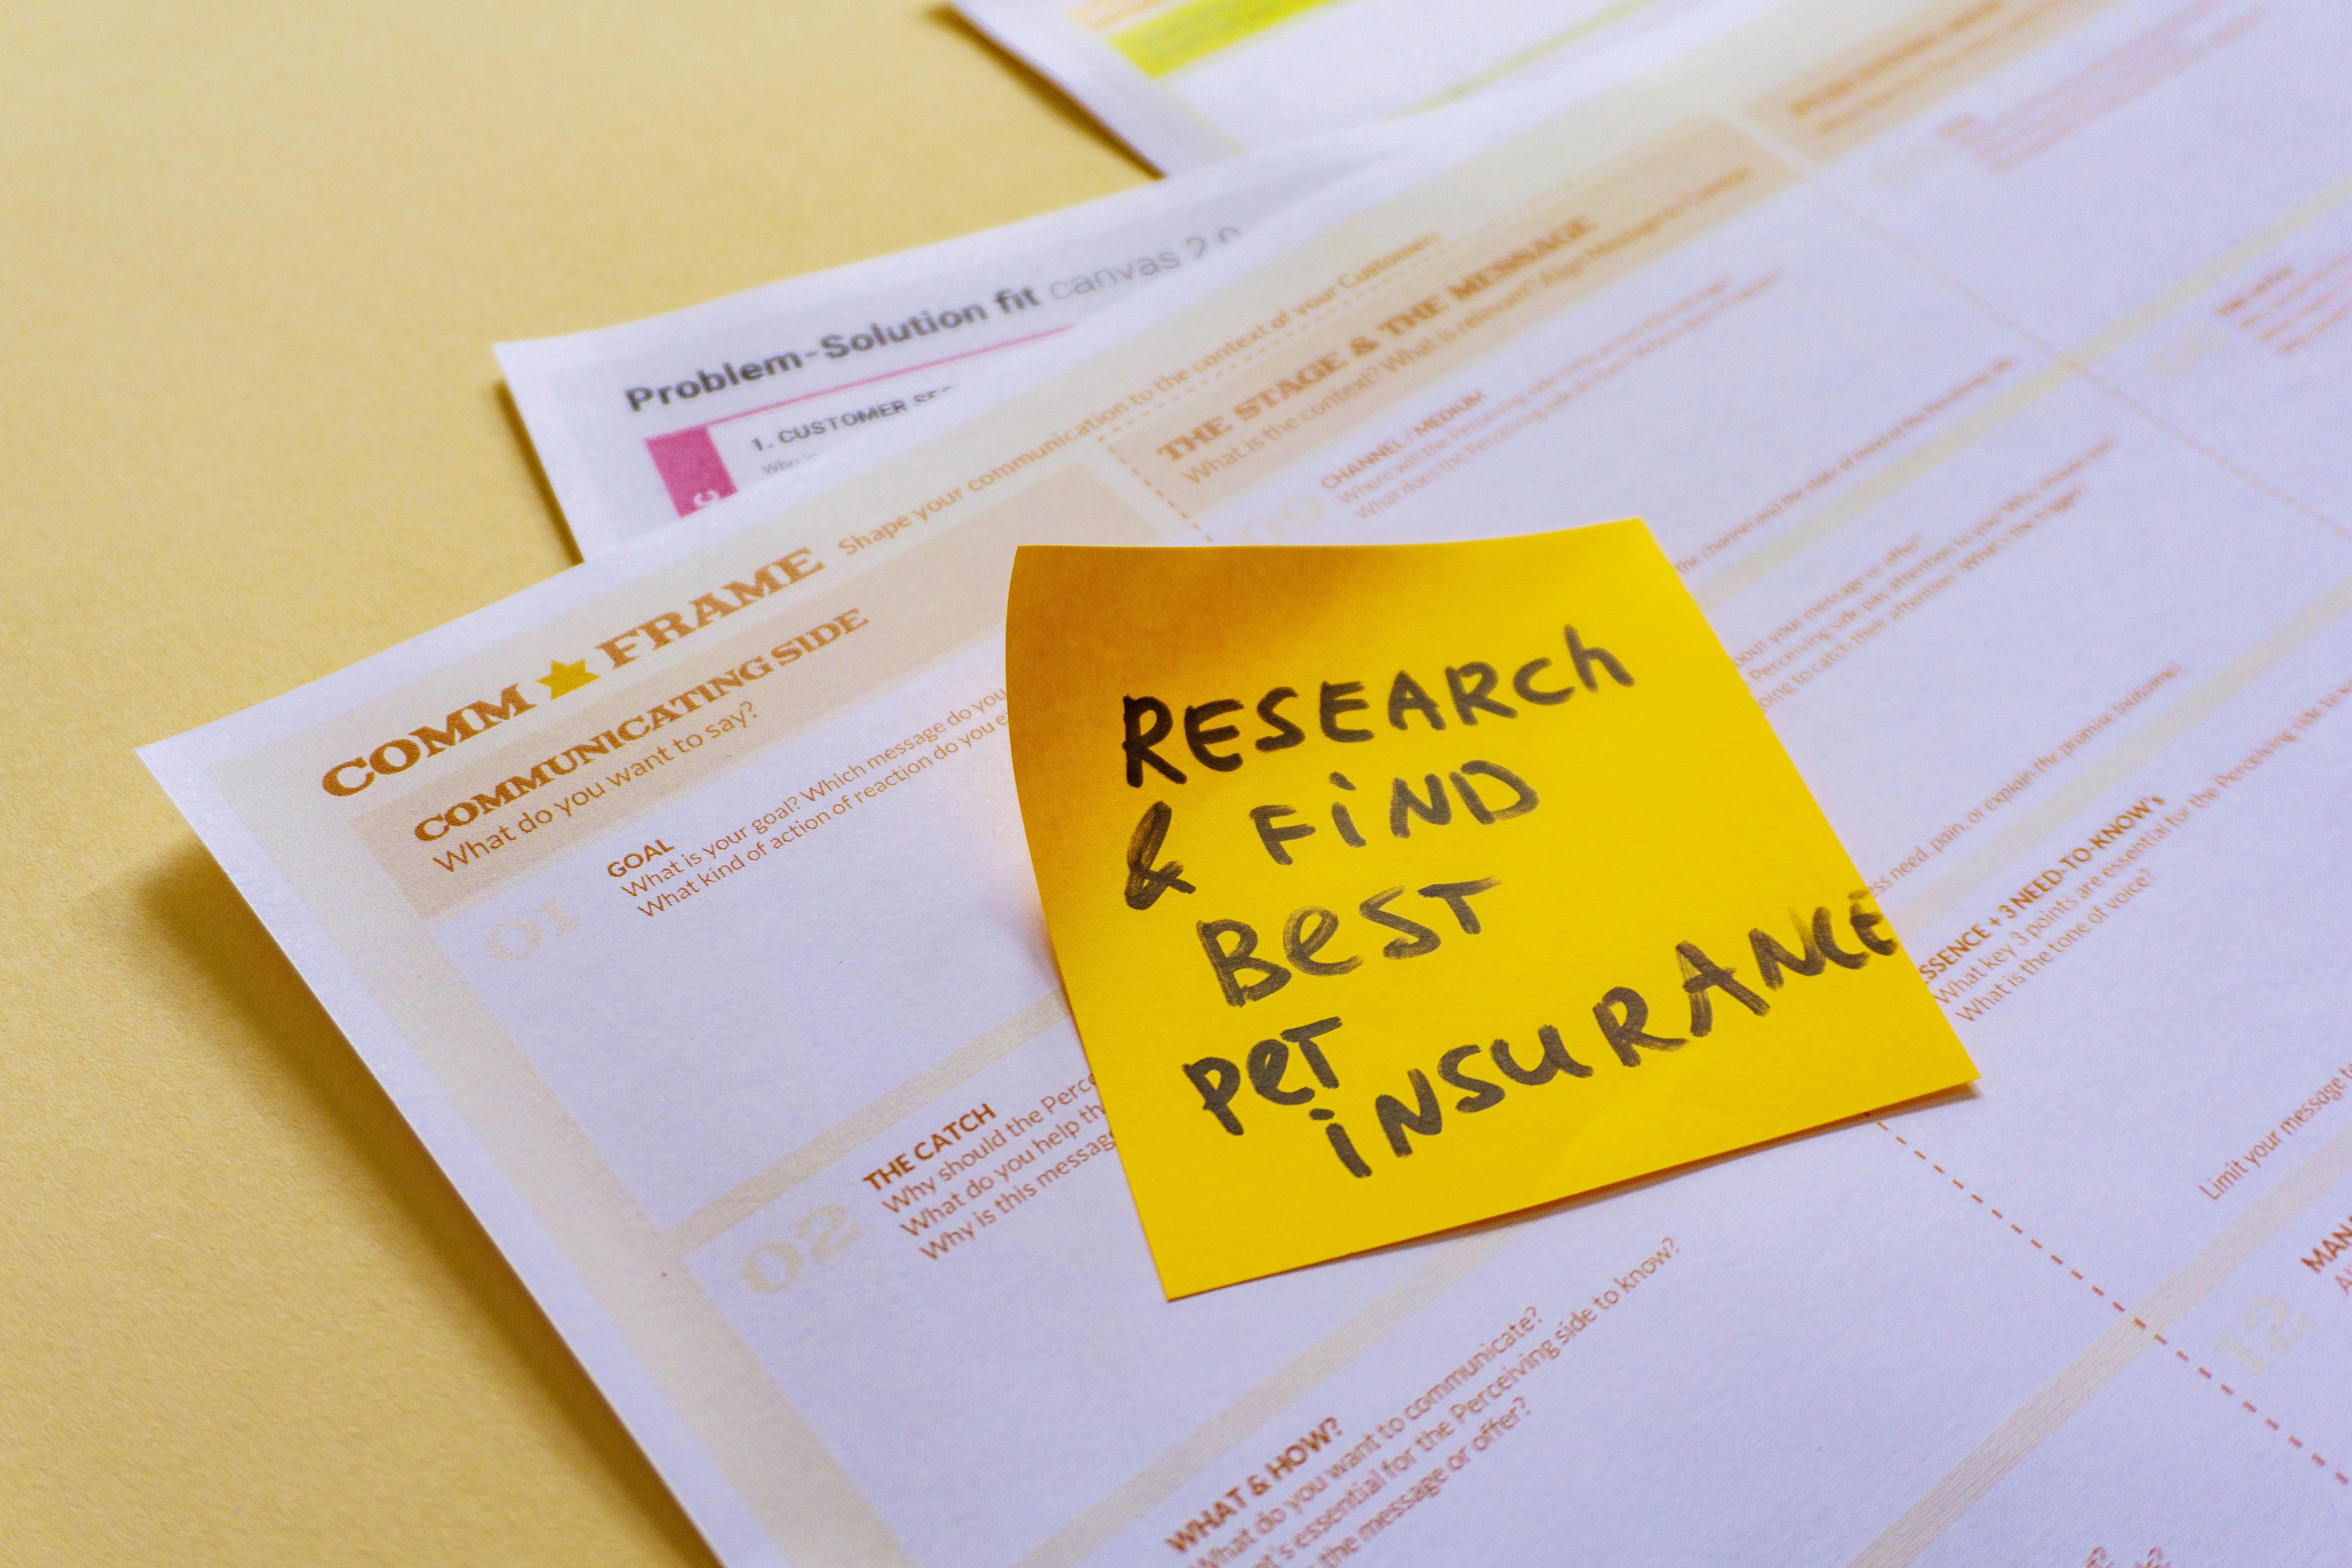 A sticky note saying 'Research & Find Best Pet Insurance' on the top of some papers